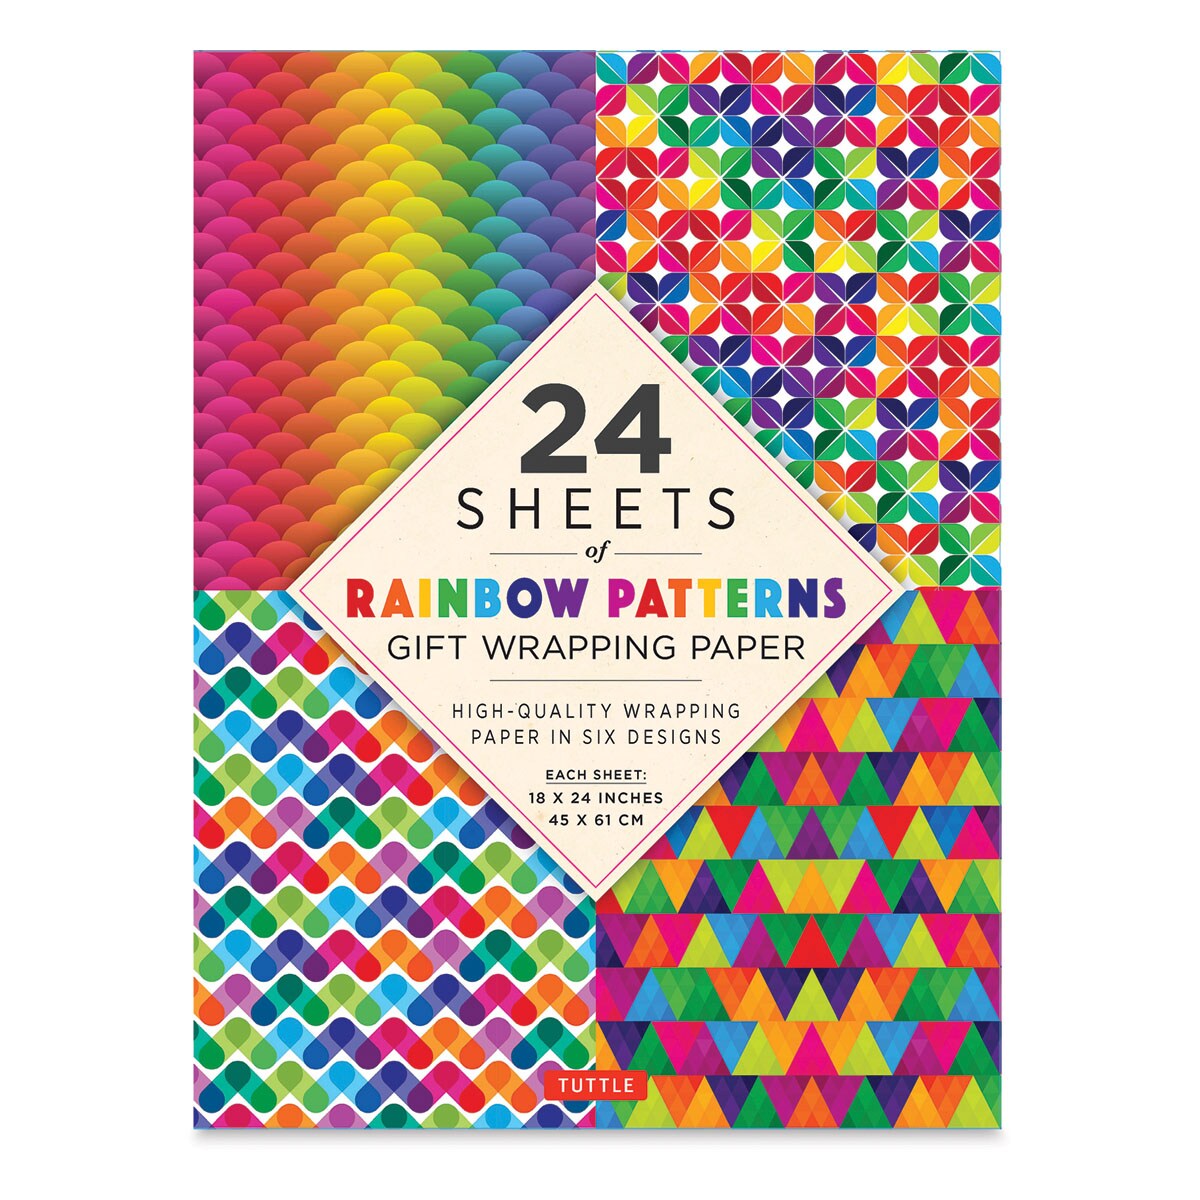 Gift Wrapping Paper Packs, Rainbow, Pkg of 24